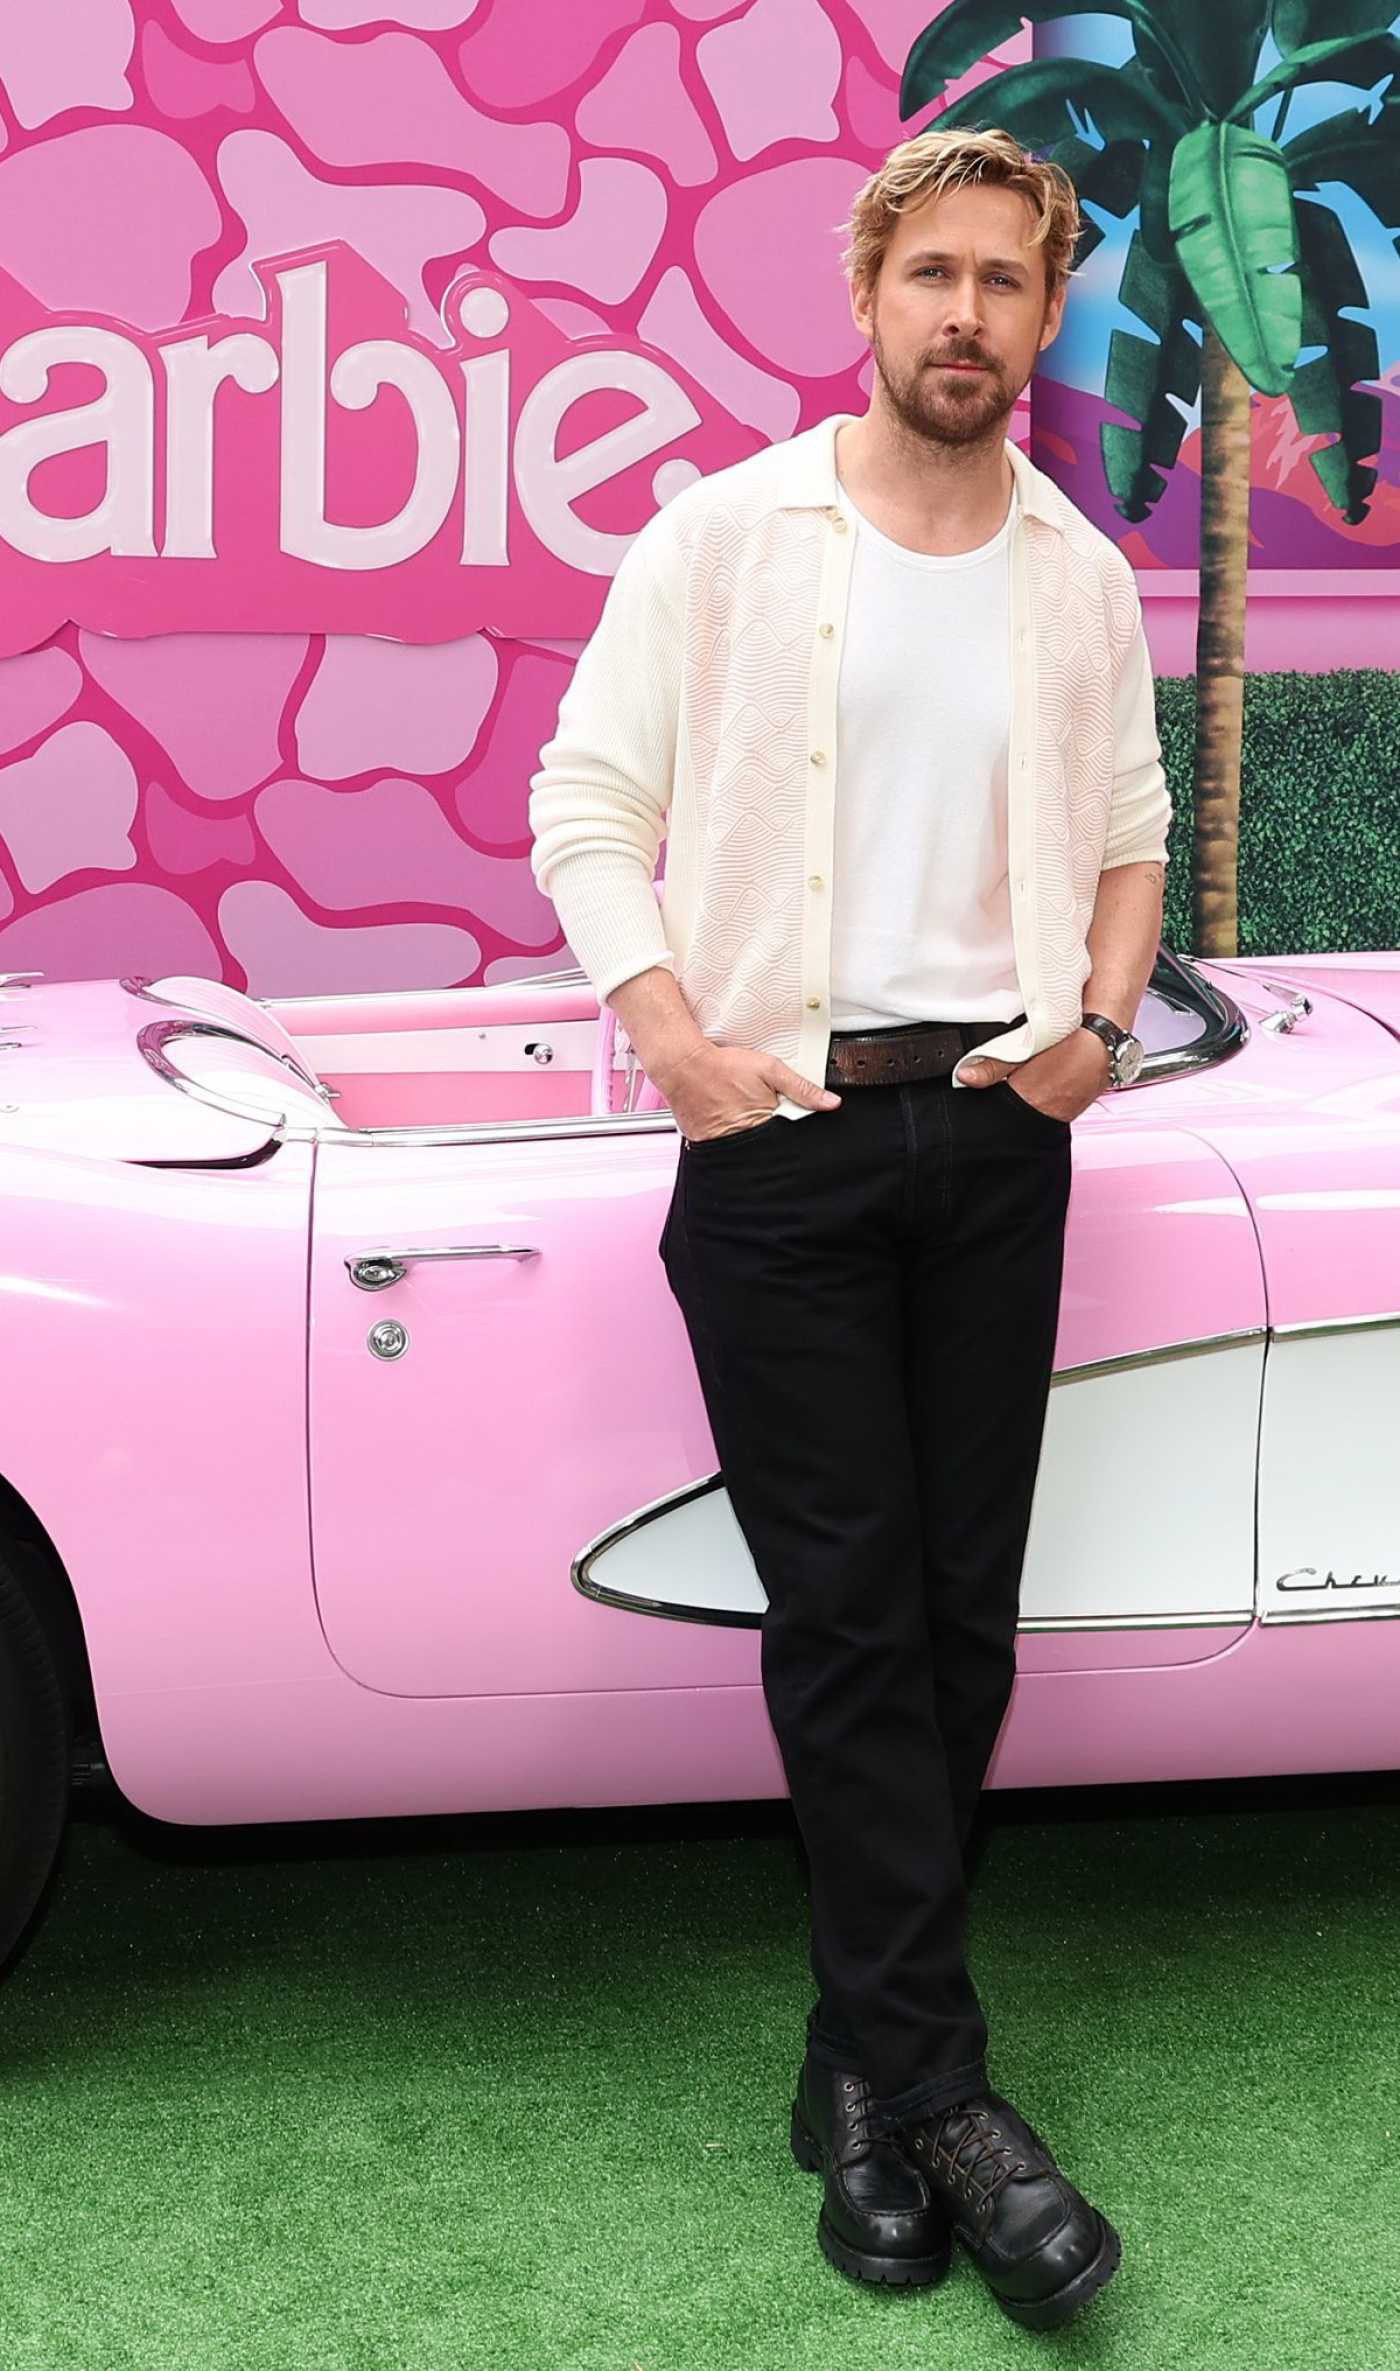 Ryan Gosling Attends Barbie Photocall at Four Seasons Hotel in Los Angeles 06/25/2023